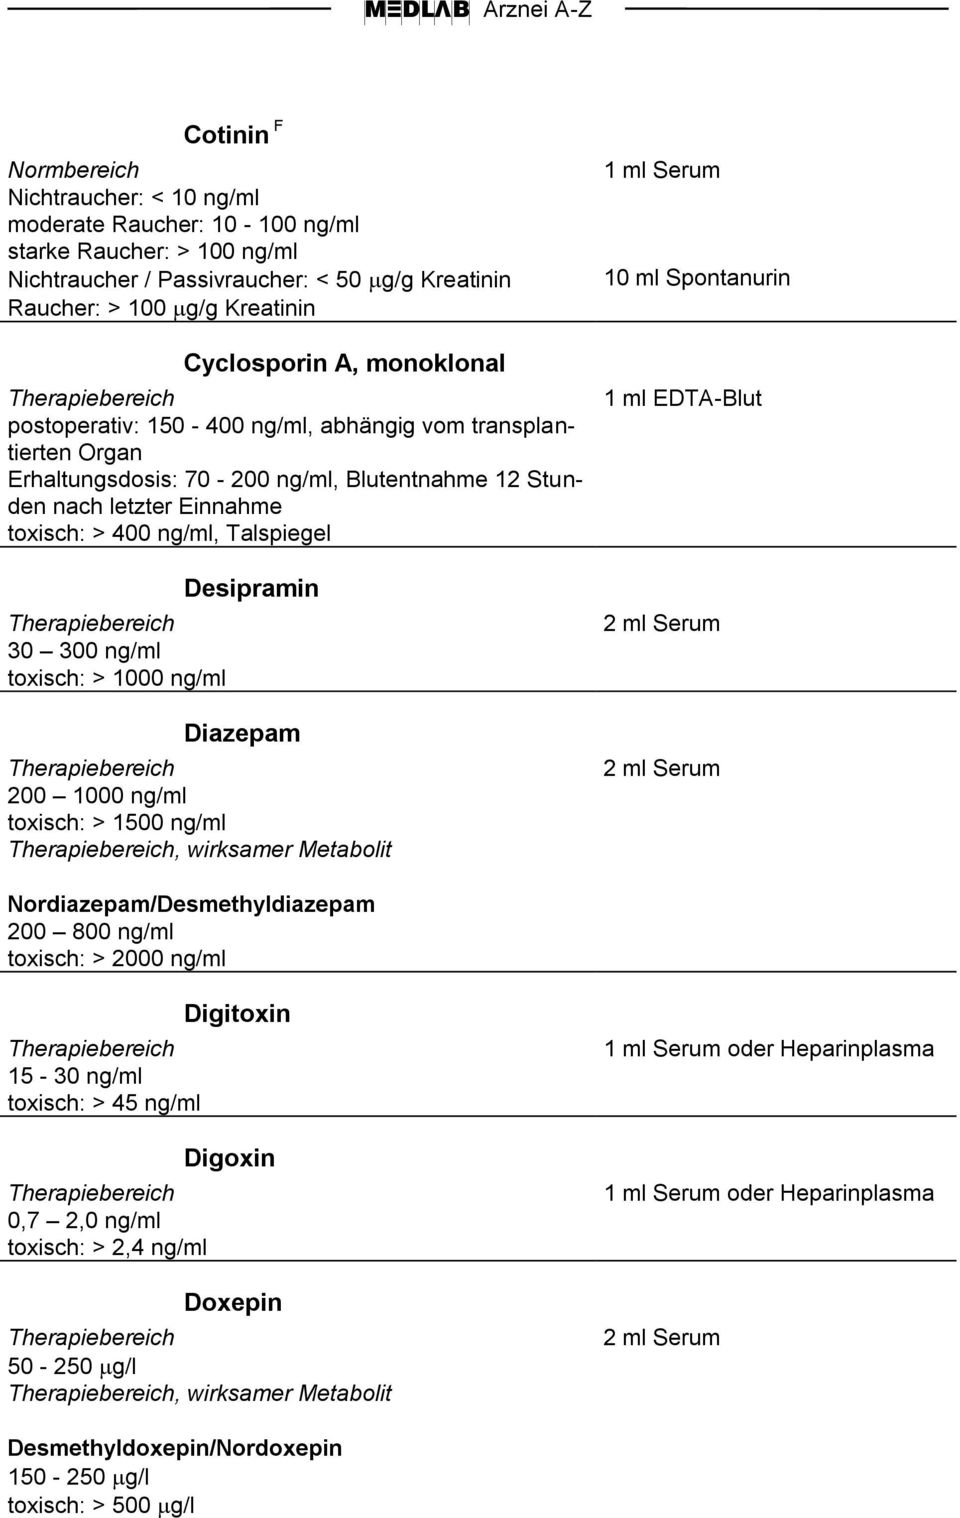 Desipramin Diazepam 200 1000 ng/ml toxisch: > 1500 ng/ml, wirksamer Metabolit 10 ml Spontanurin 1 ml EDTA-Blut Nordiazepam/Desmethyldiazepam 200 800 ng/ml toxisch: > 2000 ng/ml 15-30 ng/ml toxisch: